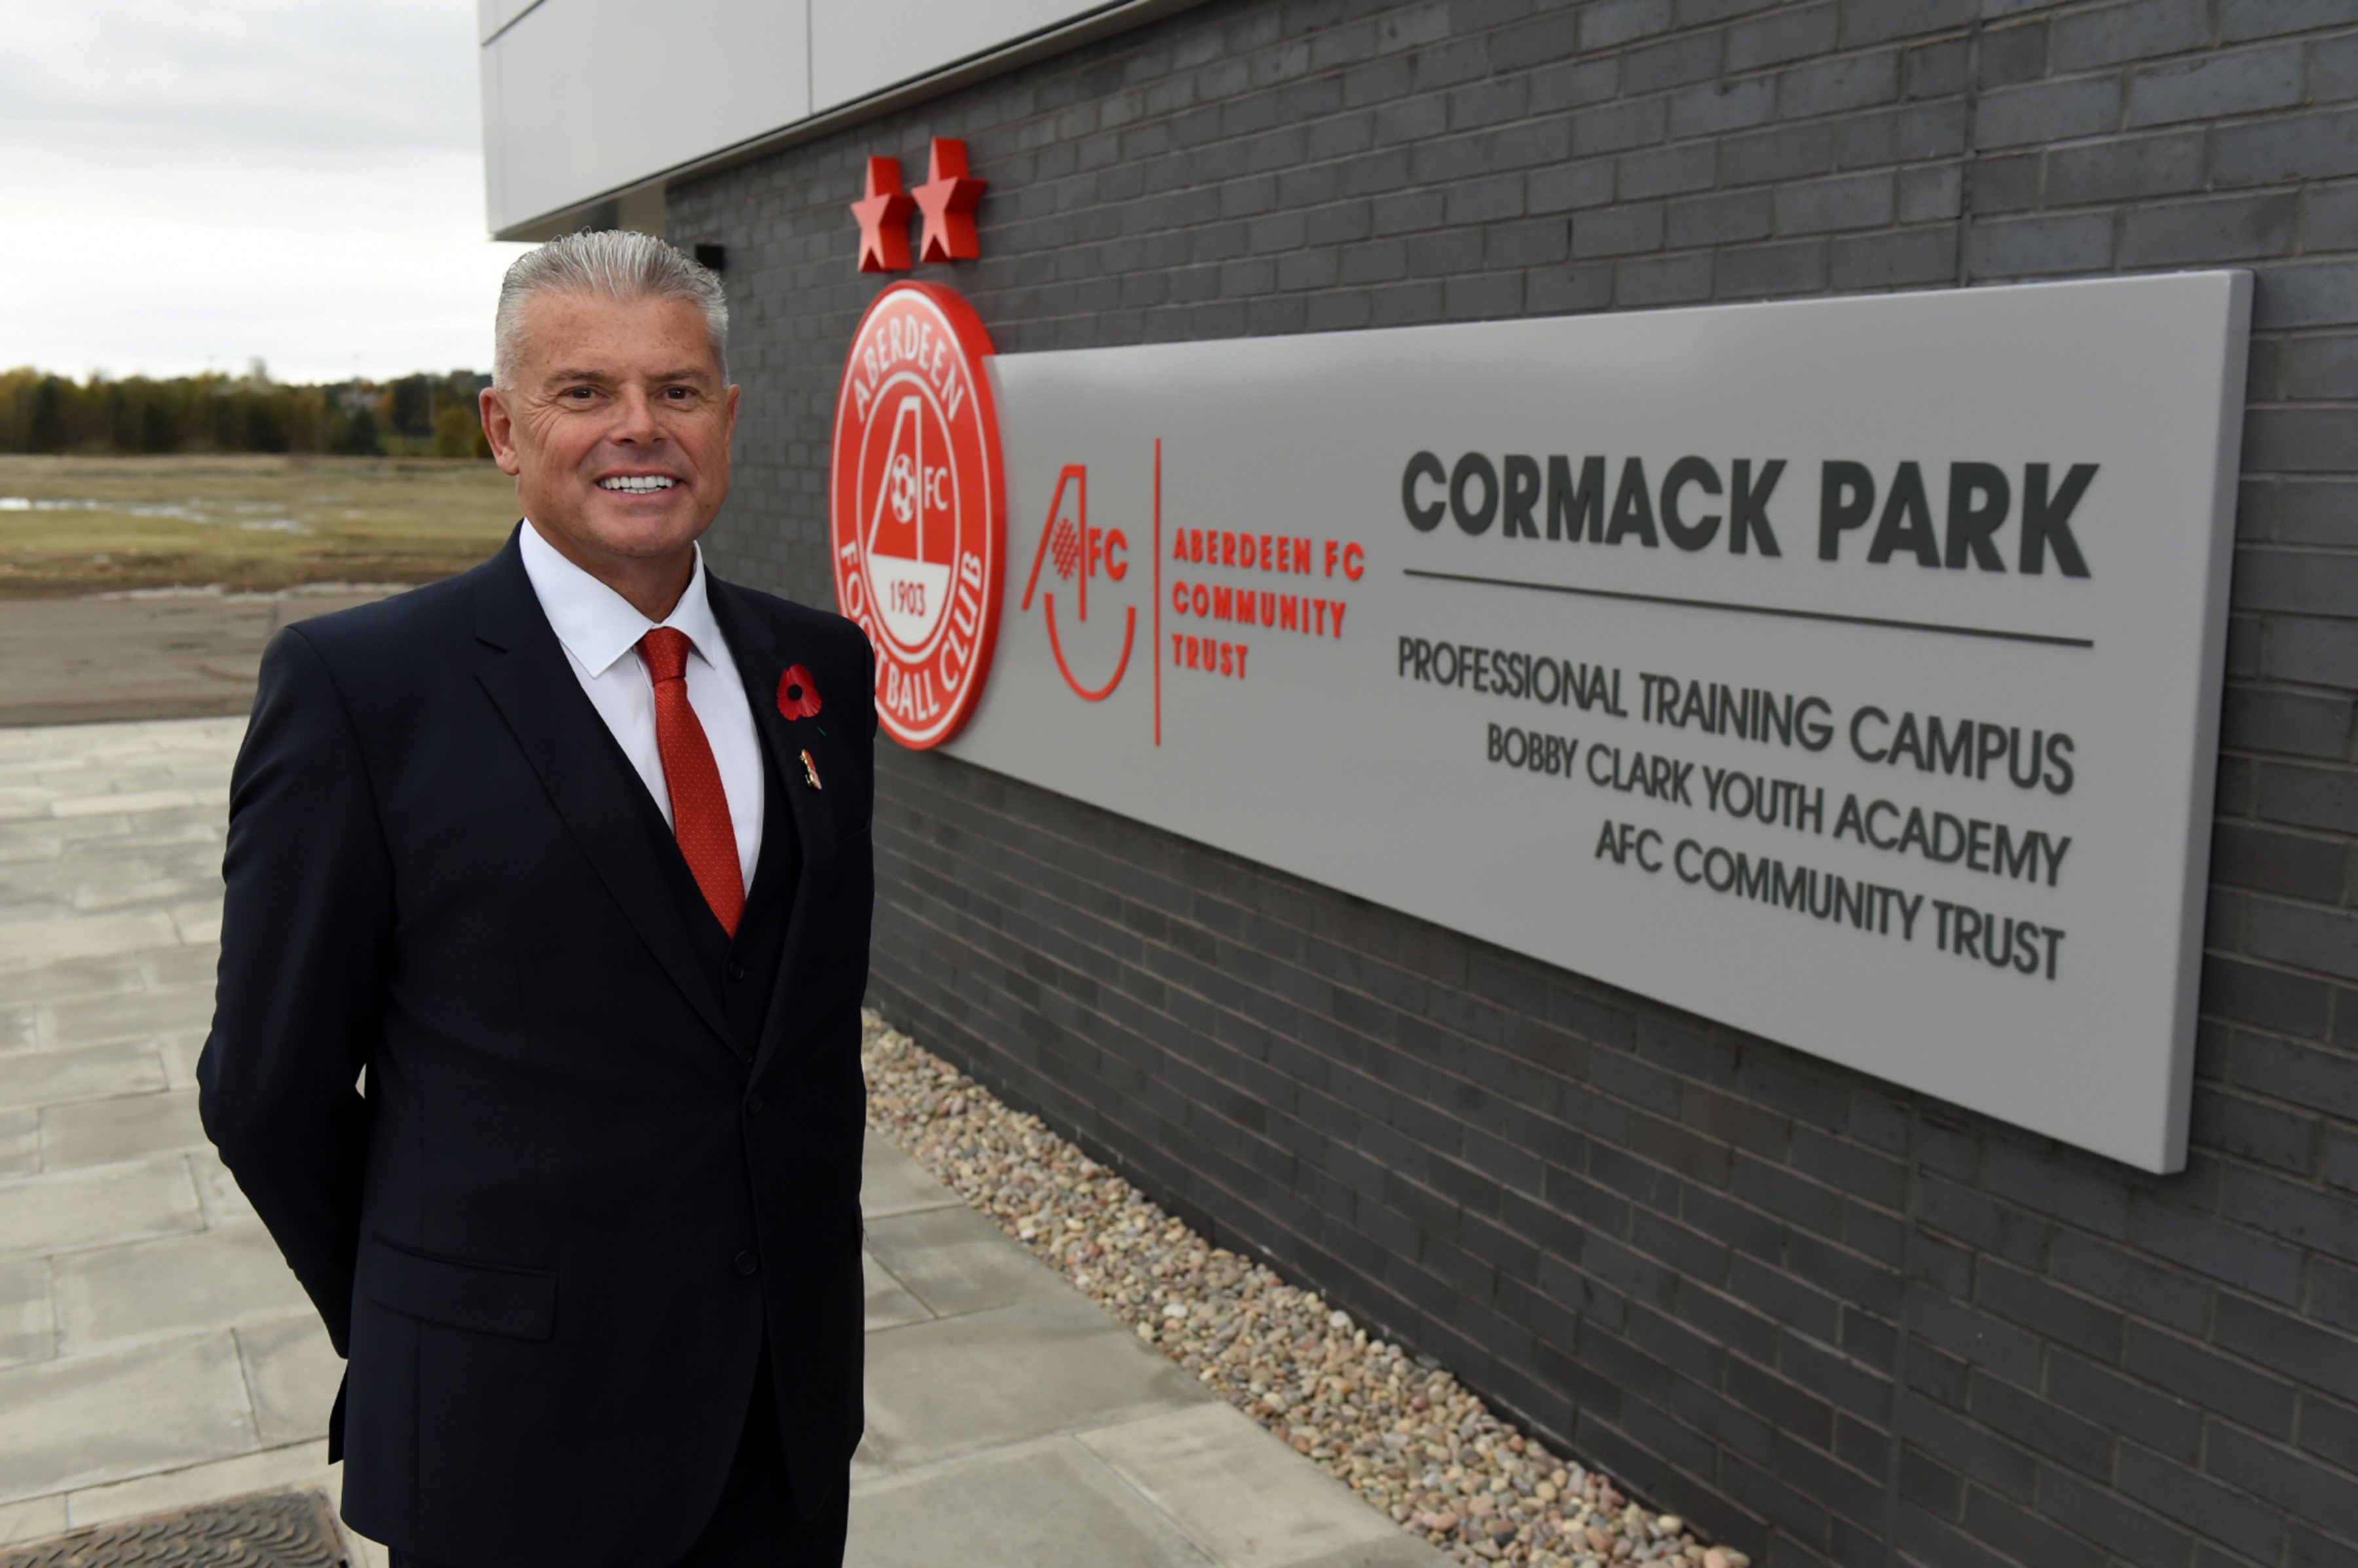 Dave Cormack at the opening of Cormack Park.